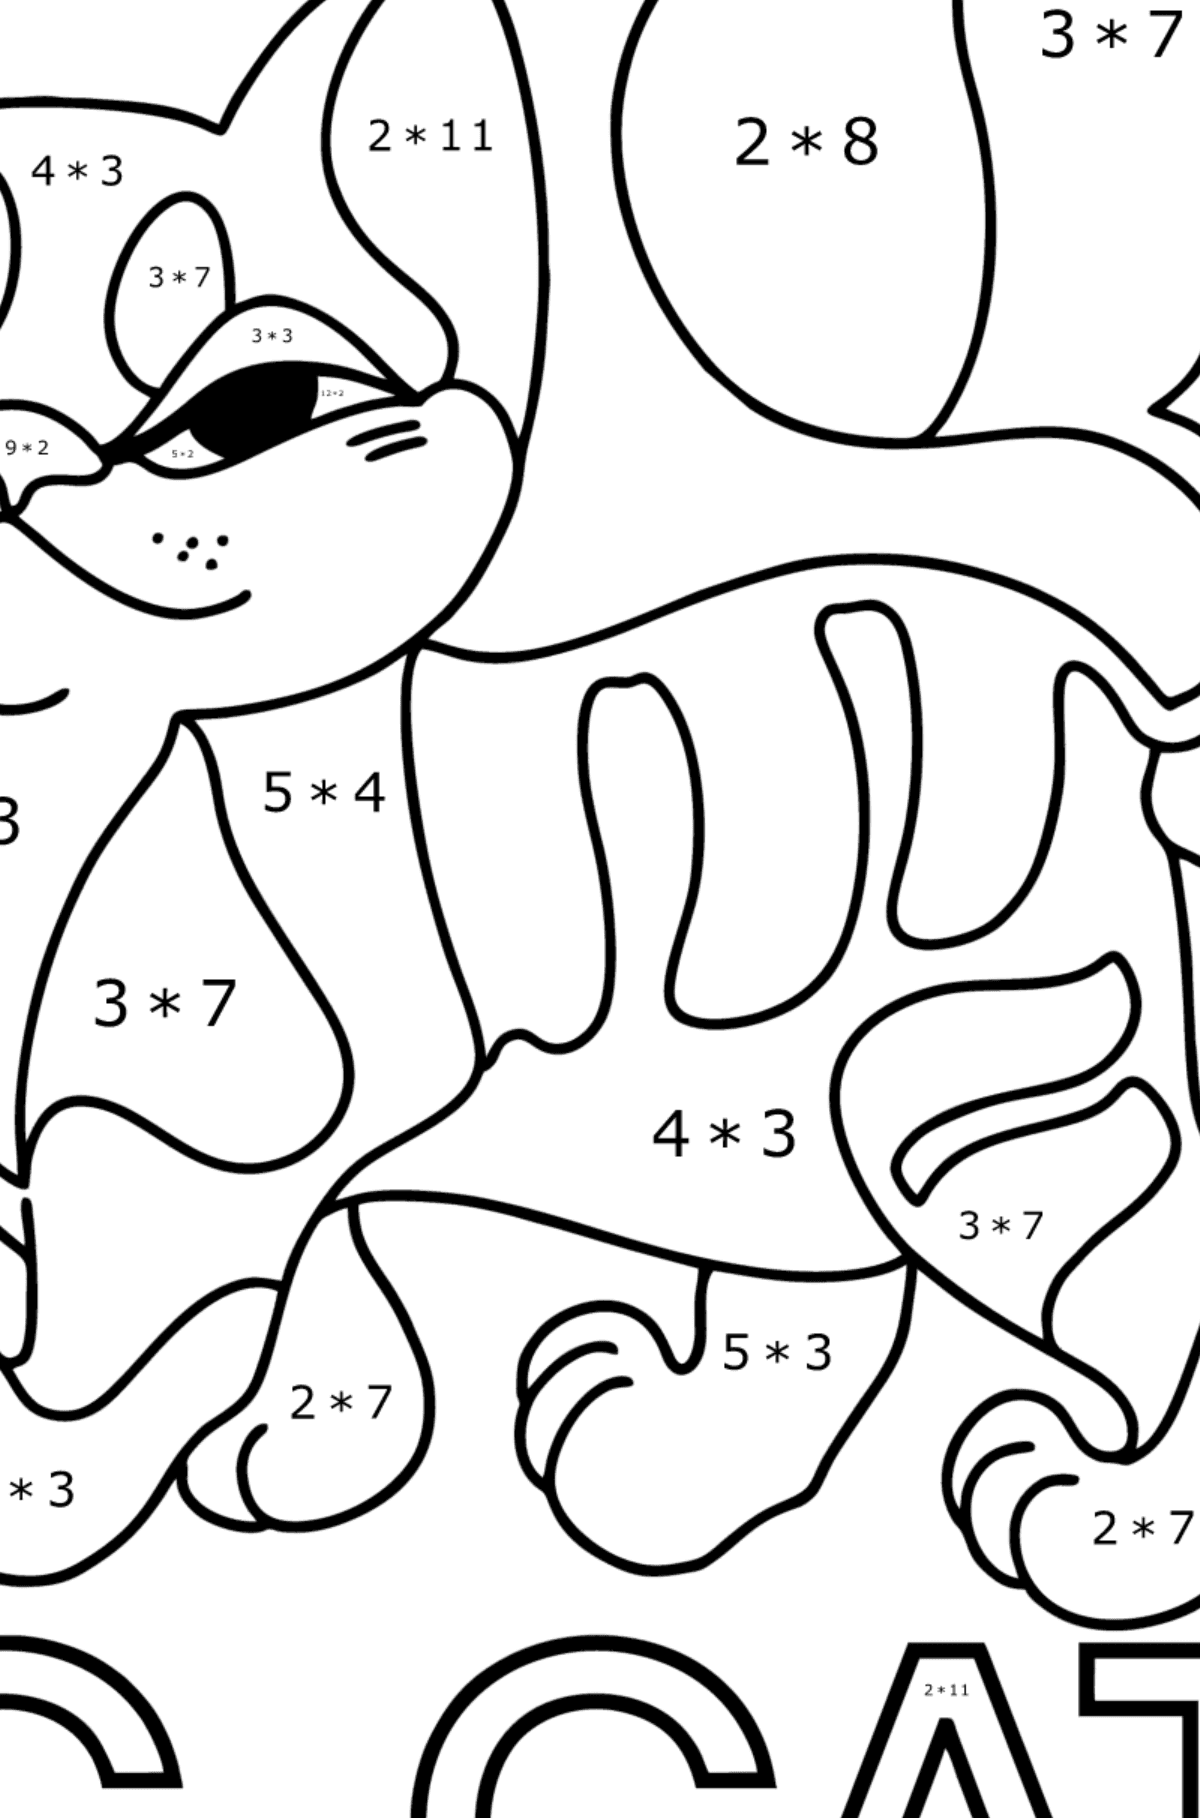 English Letter C coloring page - Math Coloring - Multiplication for Kids